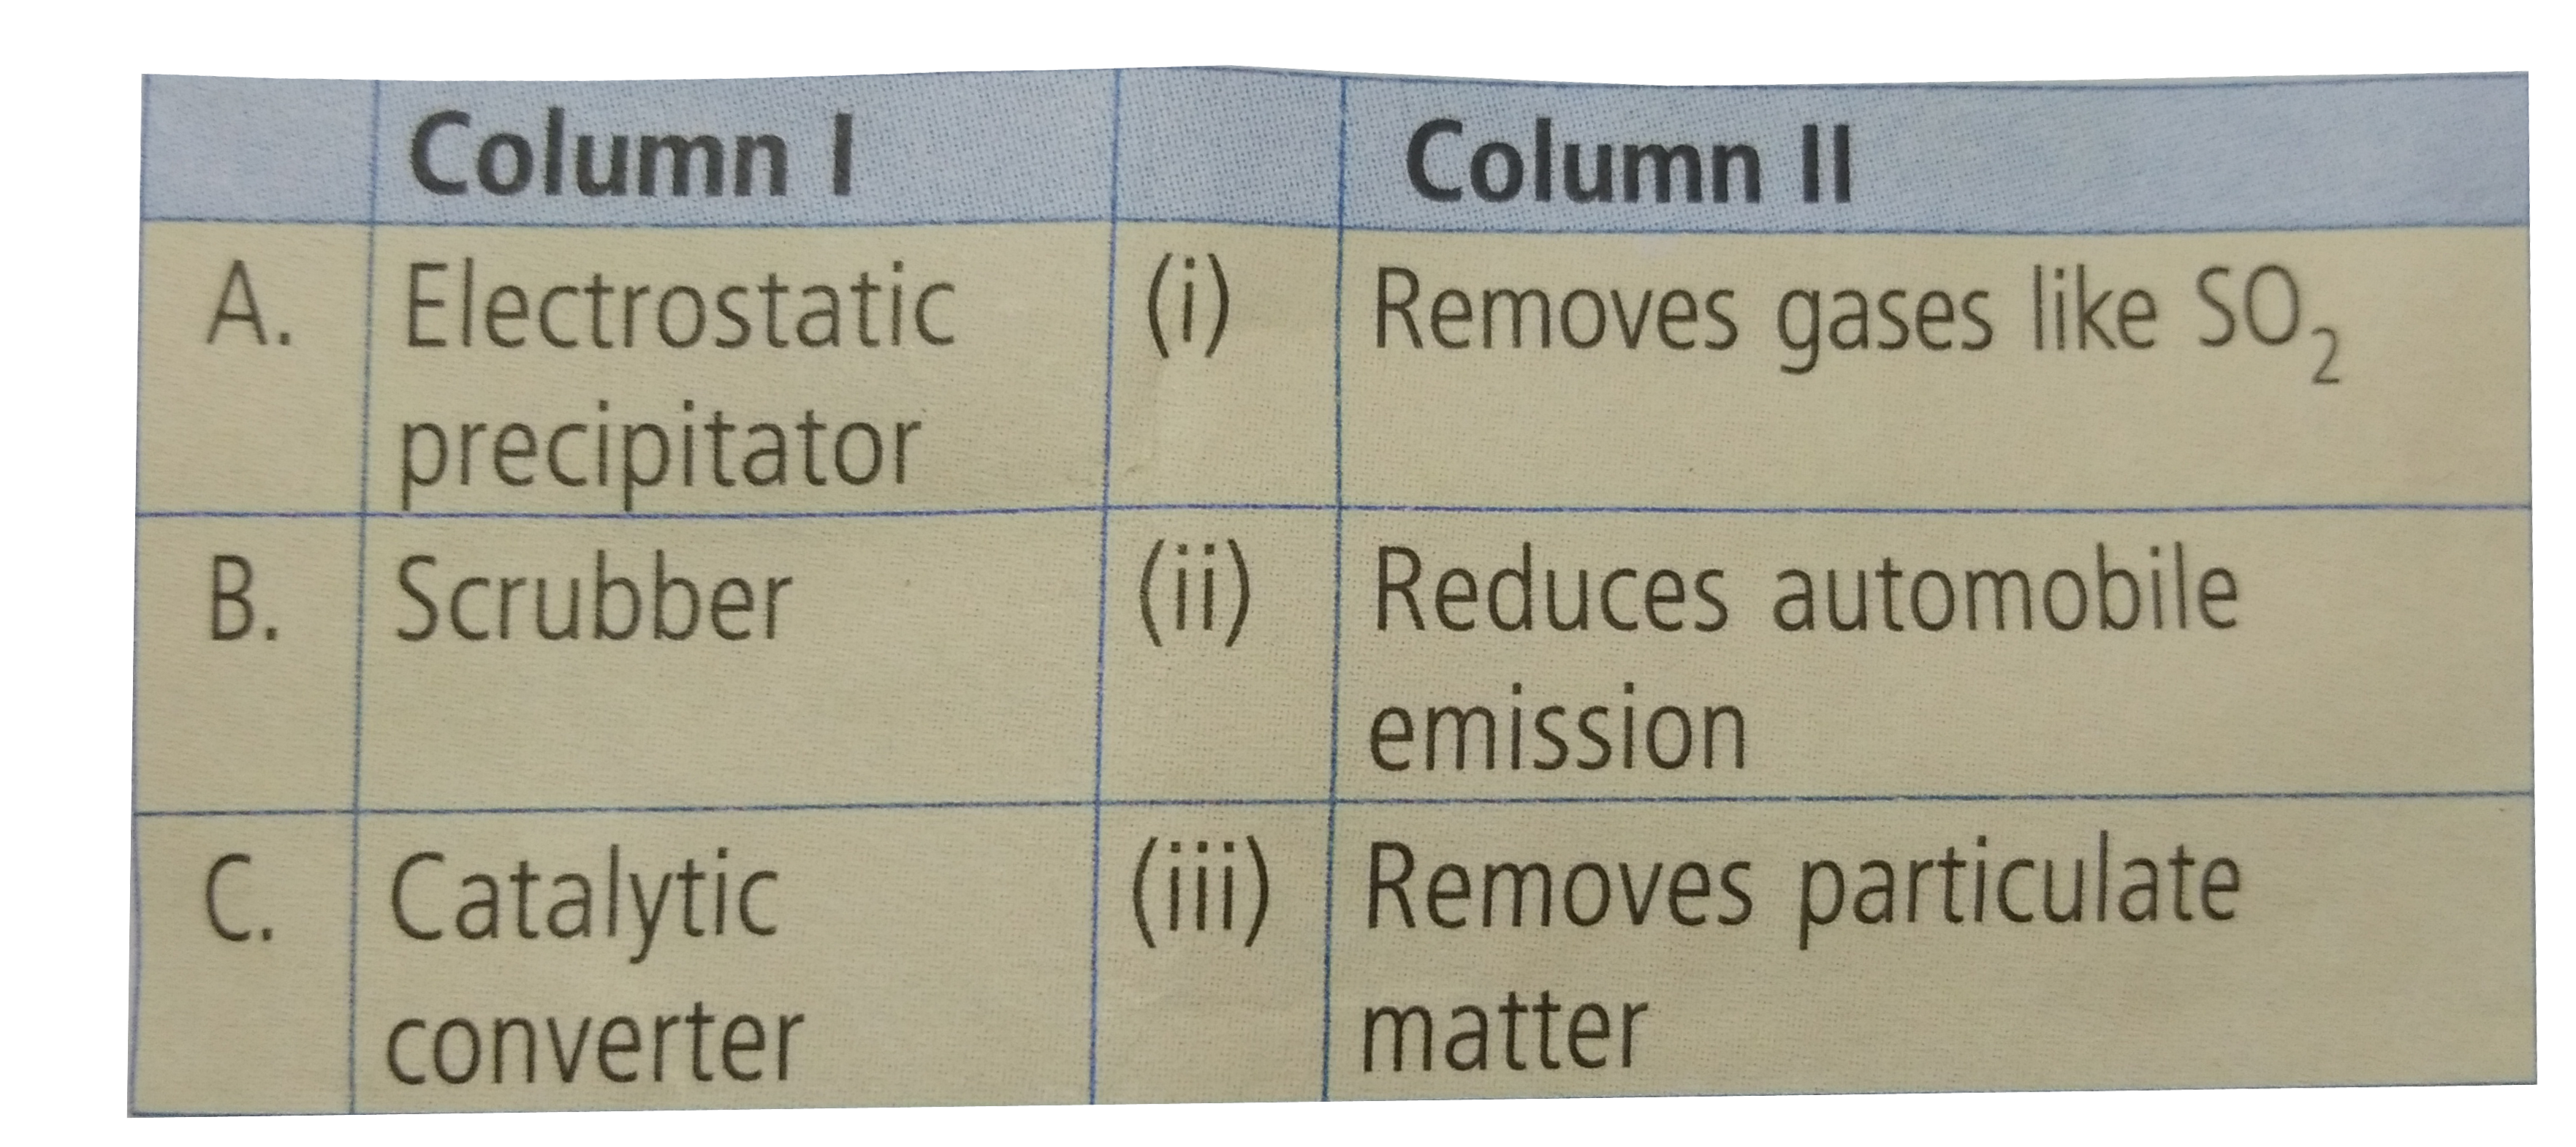 Match the column I with column II and select the correct option from the given codes.